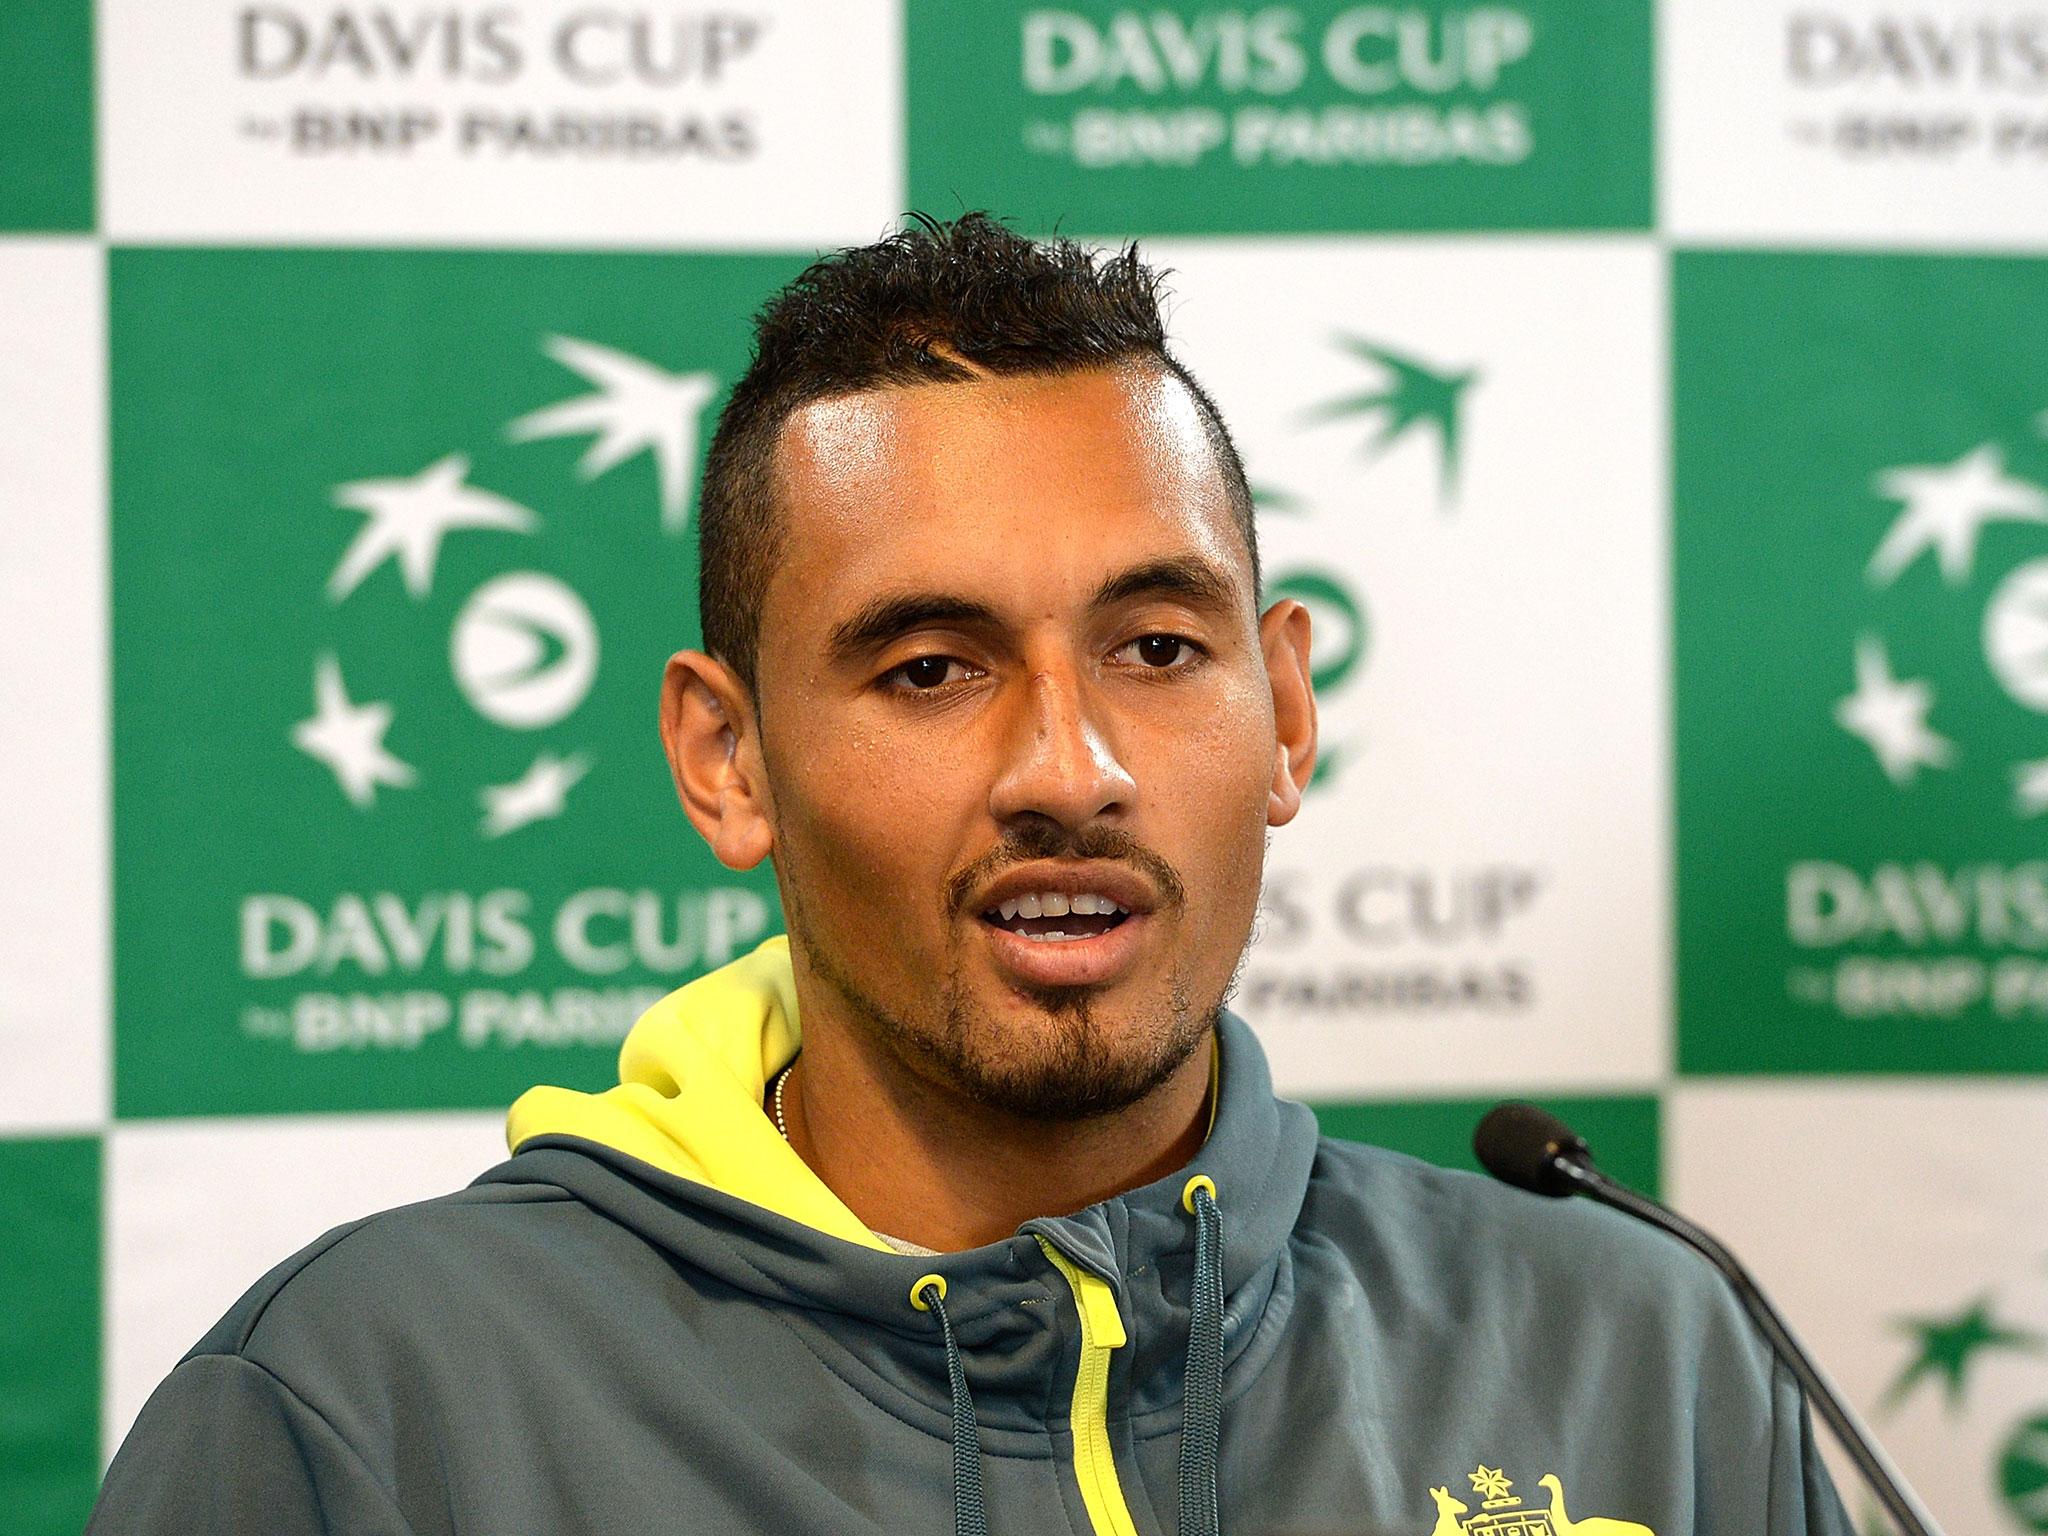 Nick Kyrgios continues to surprise with his antics